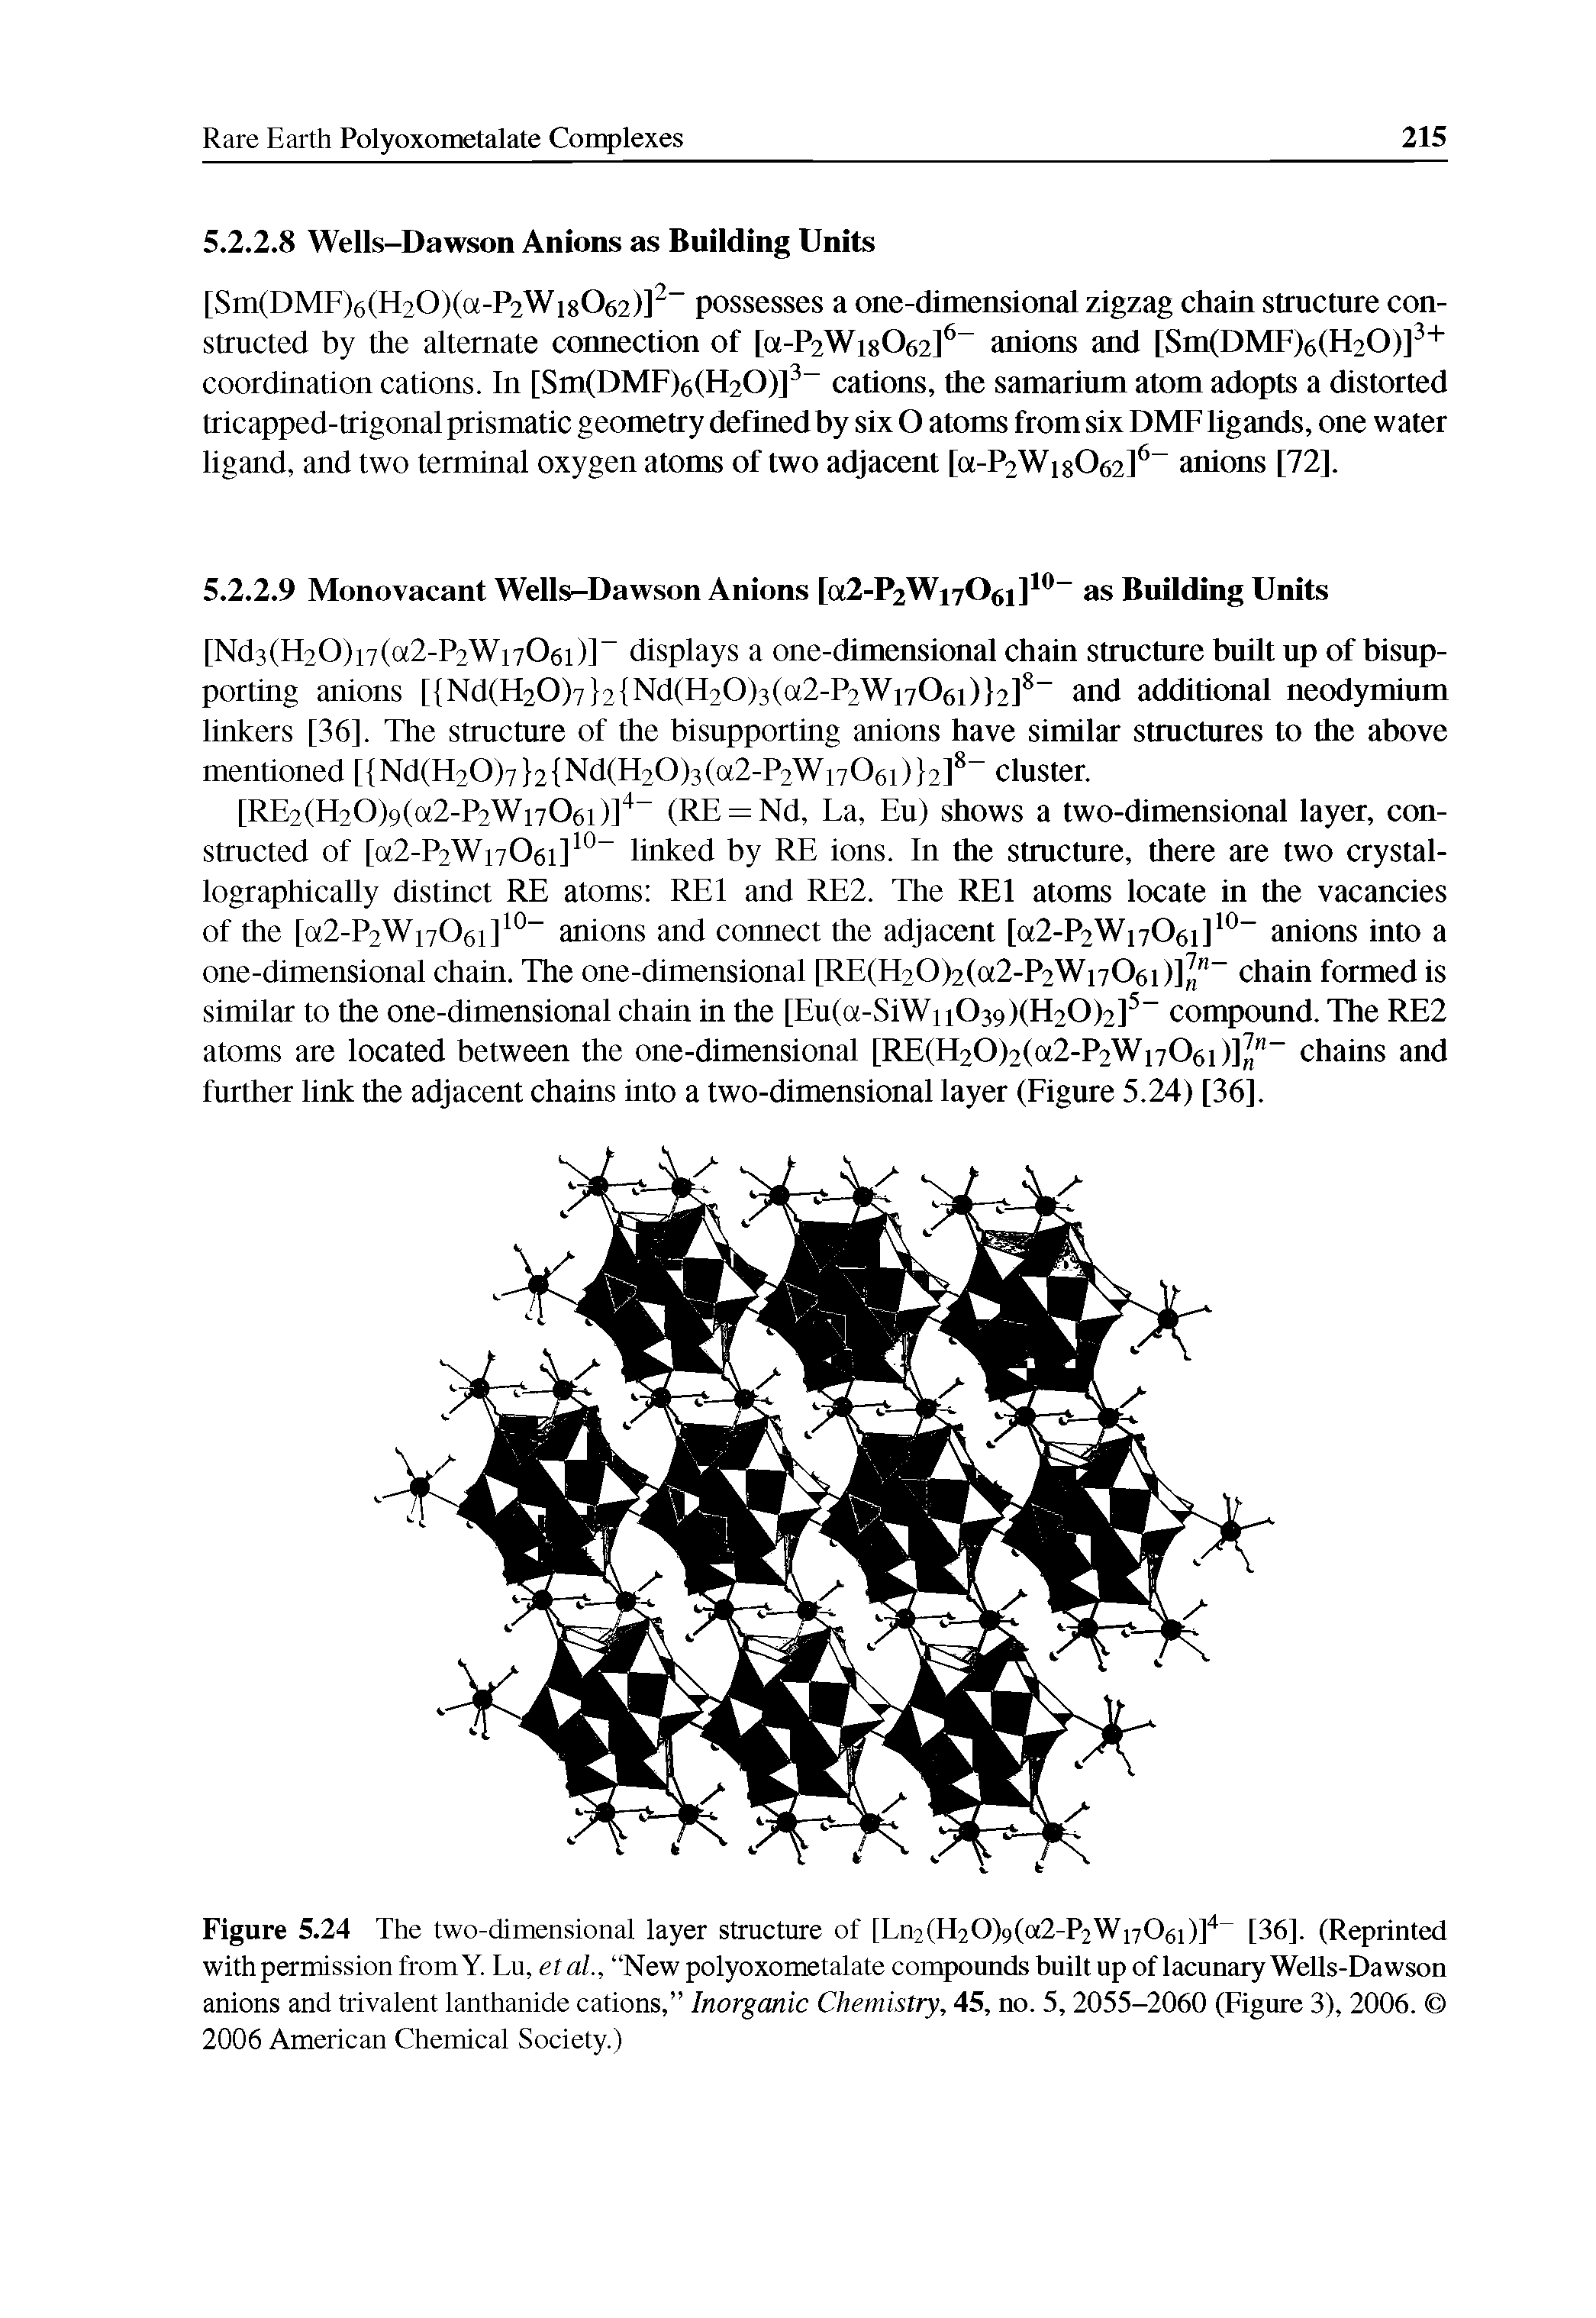 Figure 5.24 The two-dimensional layer structure of [Ln2(H20)9(a2-P2 Vi706i)]" [36]. (Reprinted with permission fromY. Lu, etal., New polyoxometalate compounds built up of lacunary Wells-Dawson anions and trivalent lanthanide cations, Inorganic Chemistry, 45, no. 5, 2055-2060 (Figure 3), 2006. 2006 American Chemical Society.)...